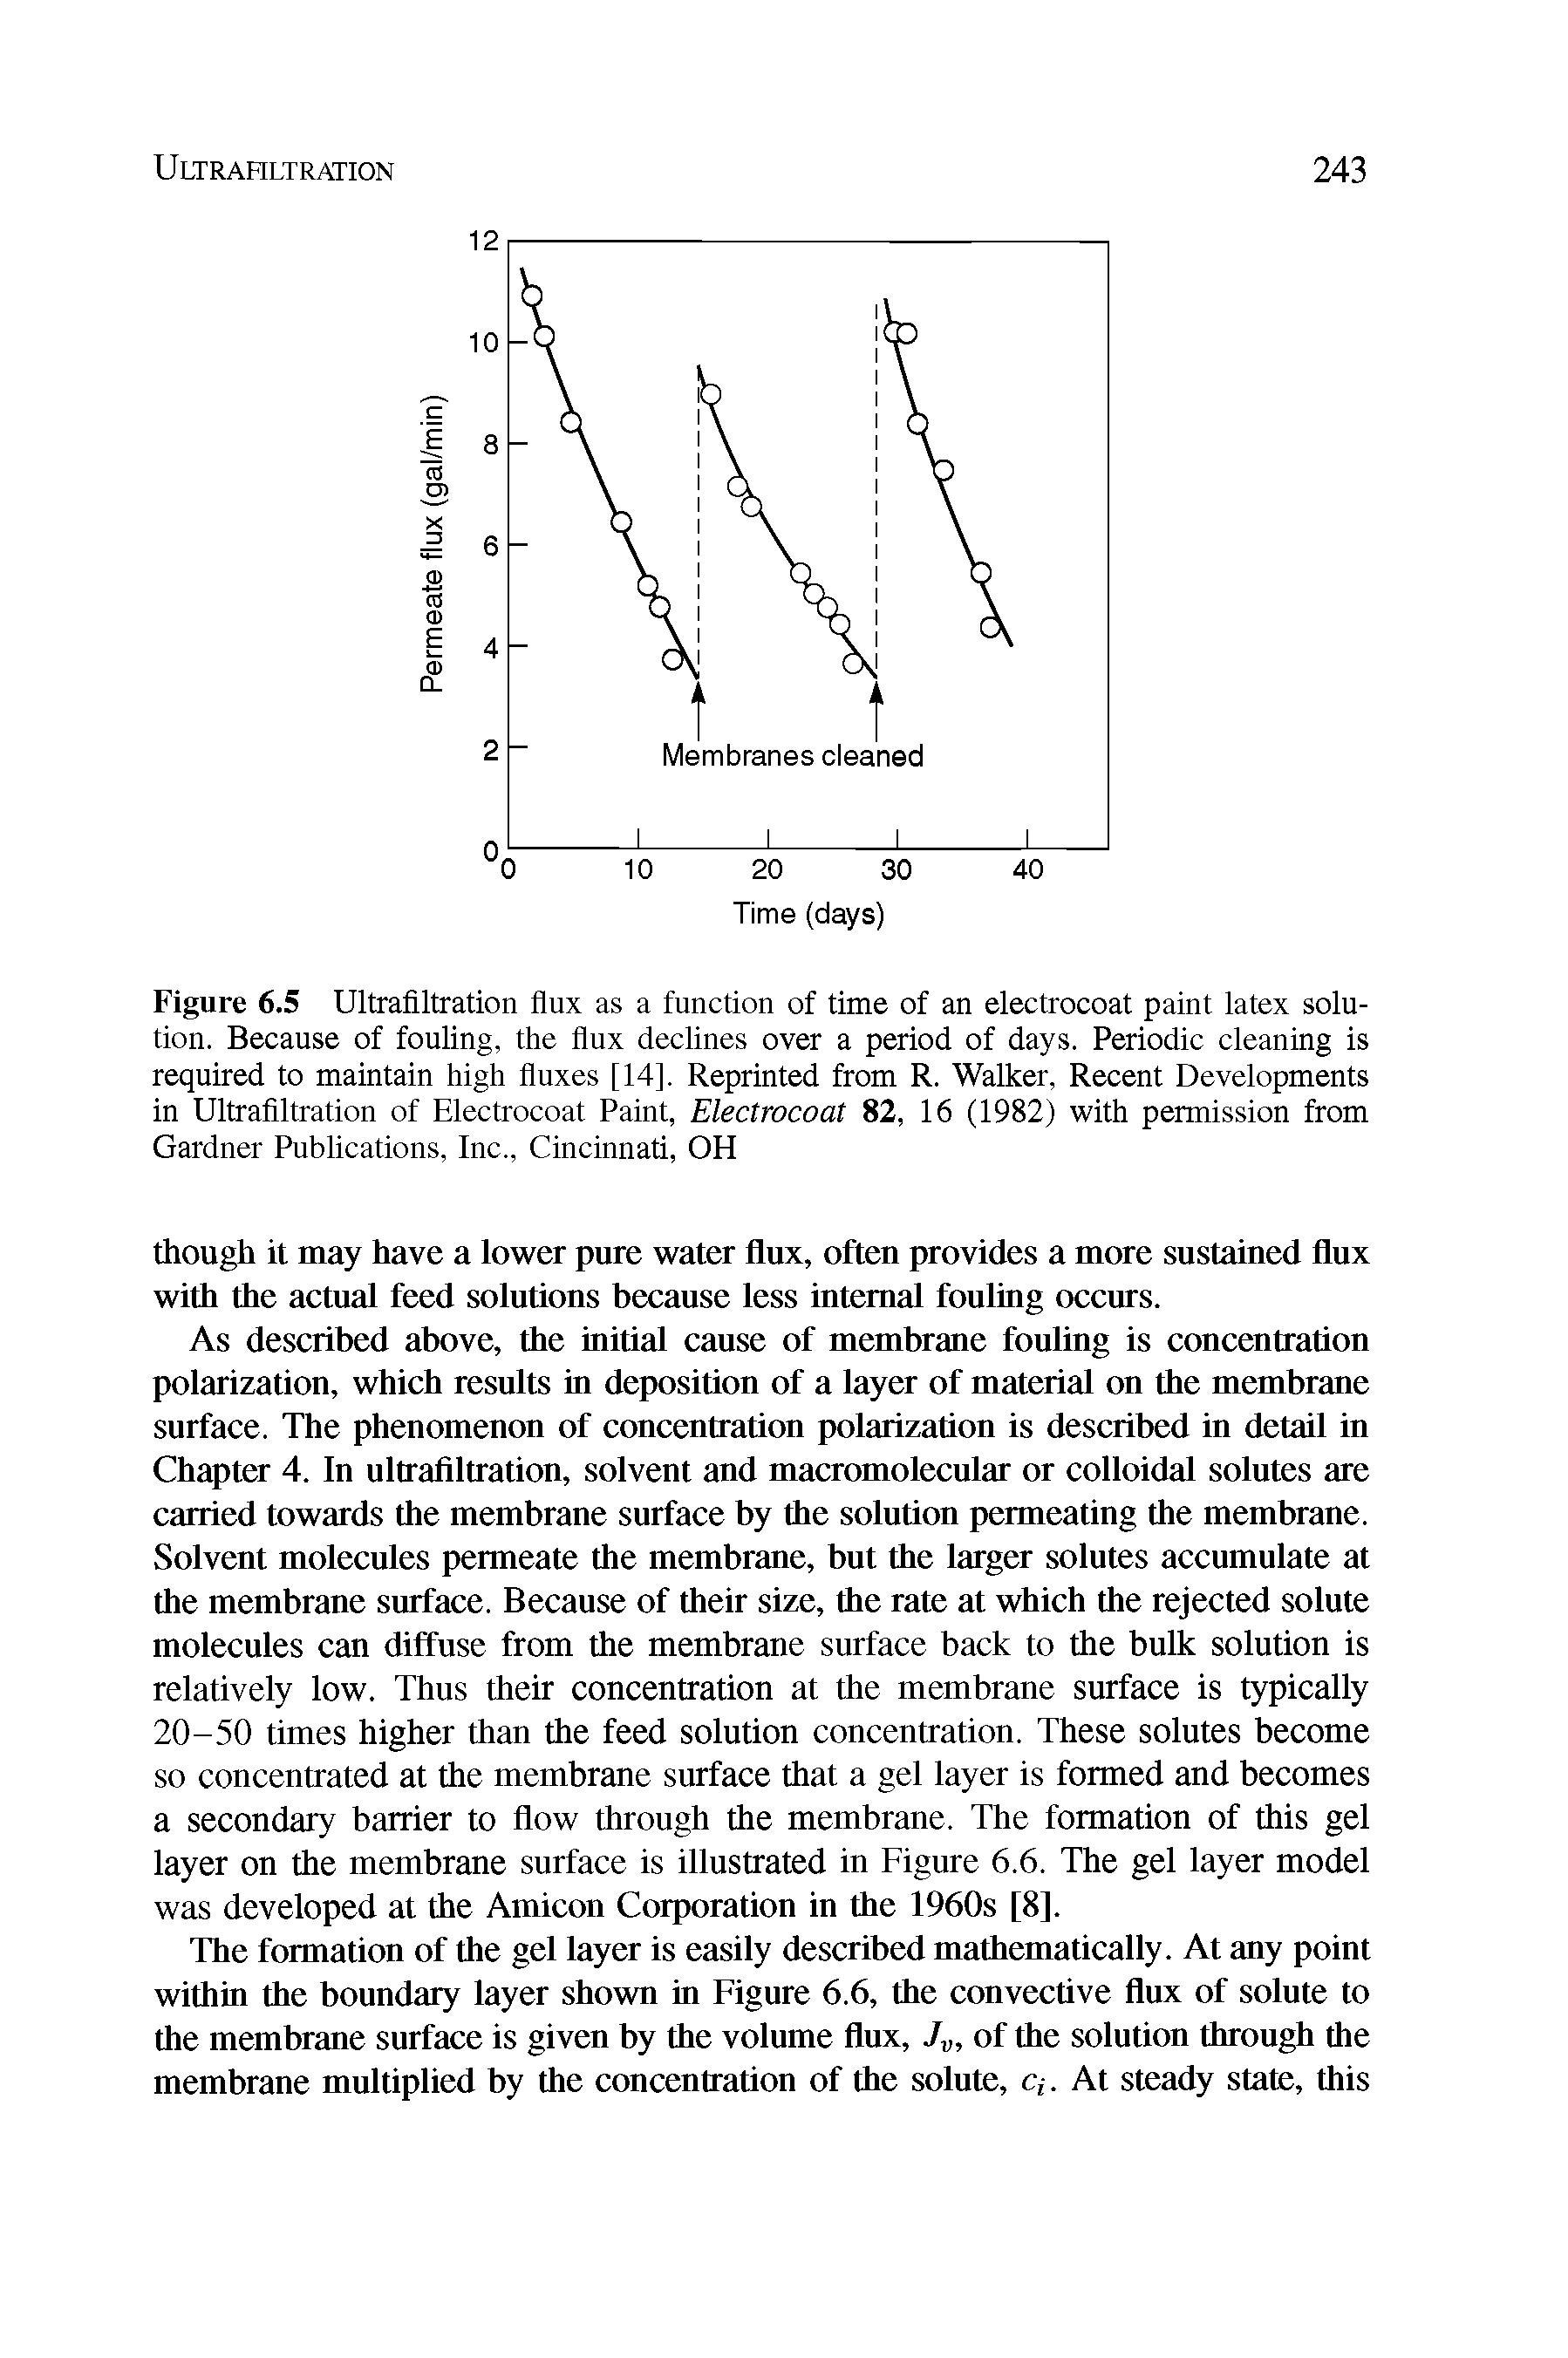 Figure 6.5 Ultrafiltration flux as a function of time of an electrocoat paint latex solution. Because of fouling, the flux declines over a period of days. Periodic cleaning is required to maintain high fluxes [14]. Reprinted from R. Walker, Recent Developments in Ultrafiltration of Electrocoat Paint, Electrocoat 82, 16 (1982) with permission from Gardner Publications, Inc., Cincinnati, OH...